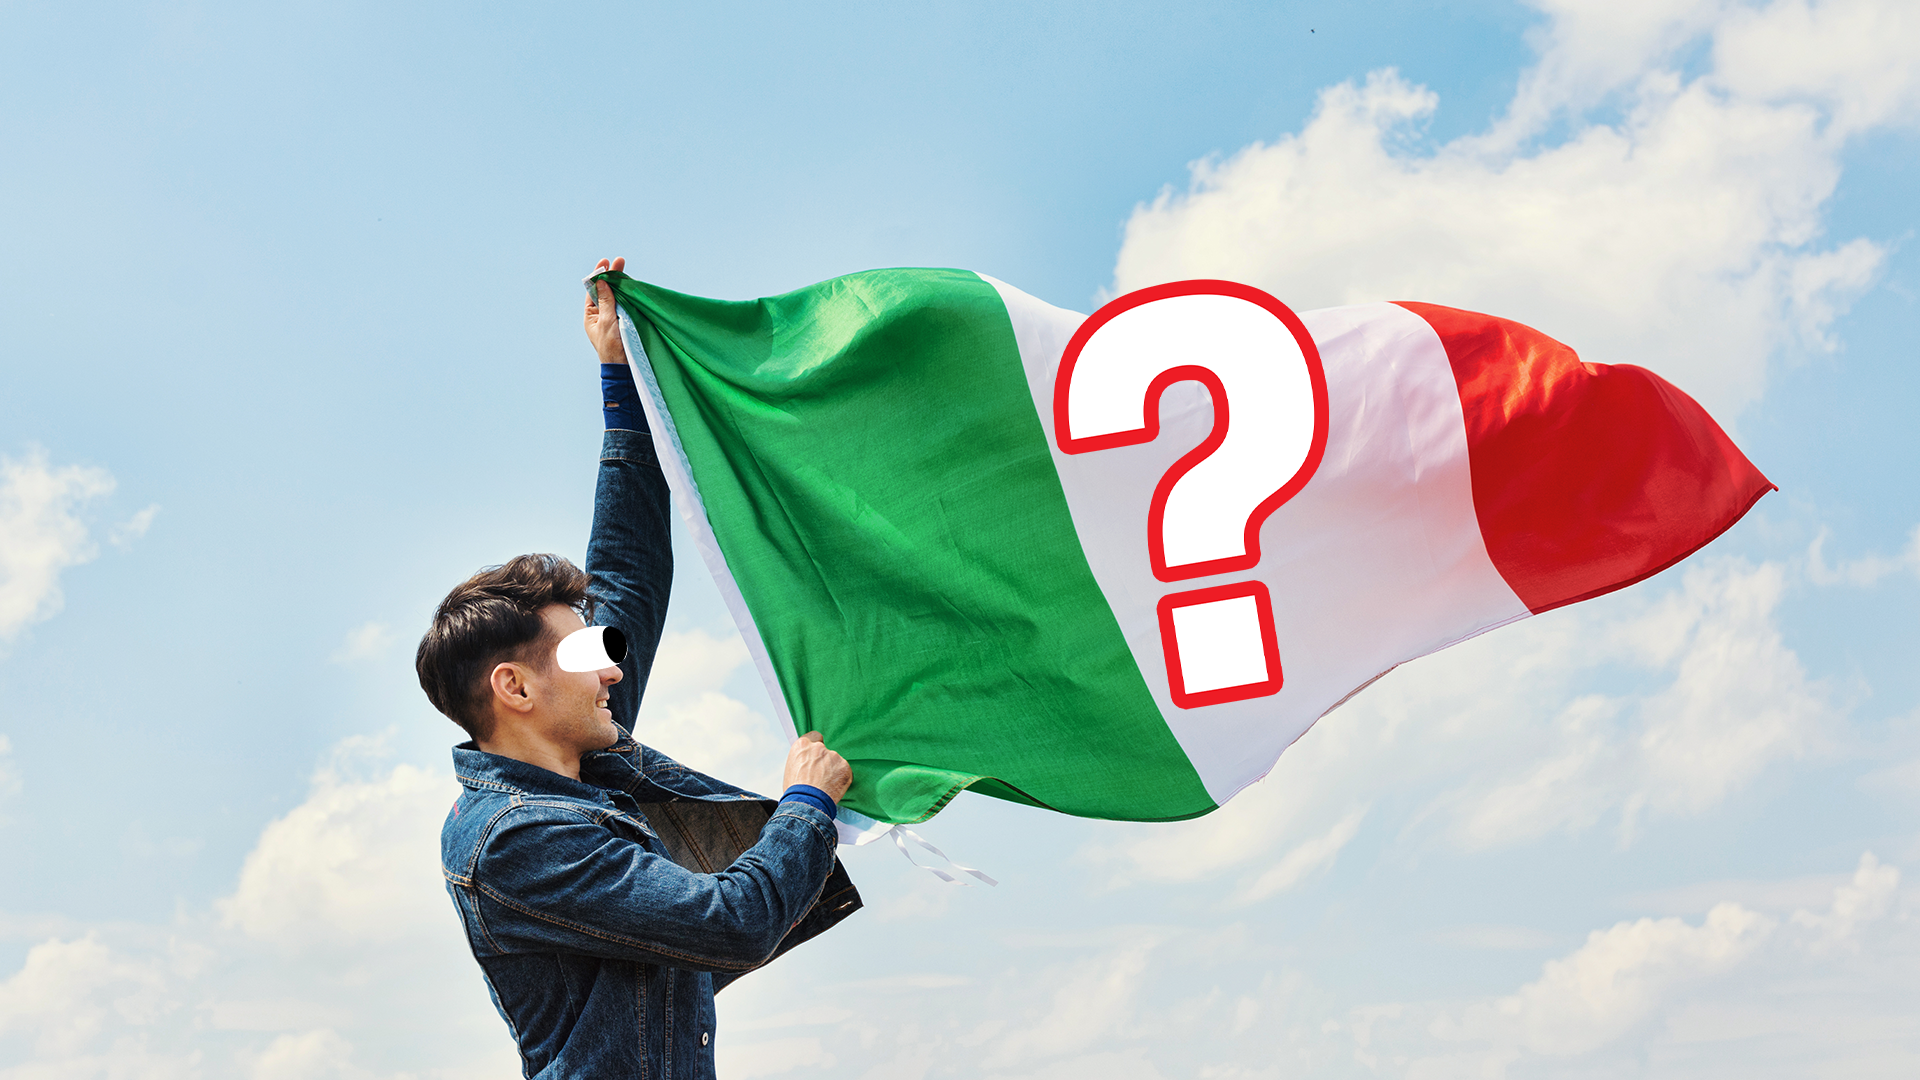 Man with Italy flag and question mark